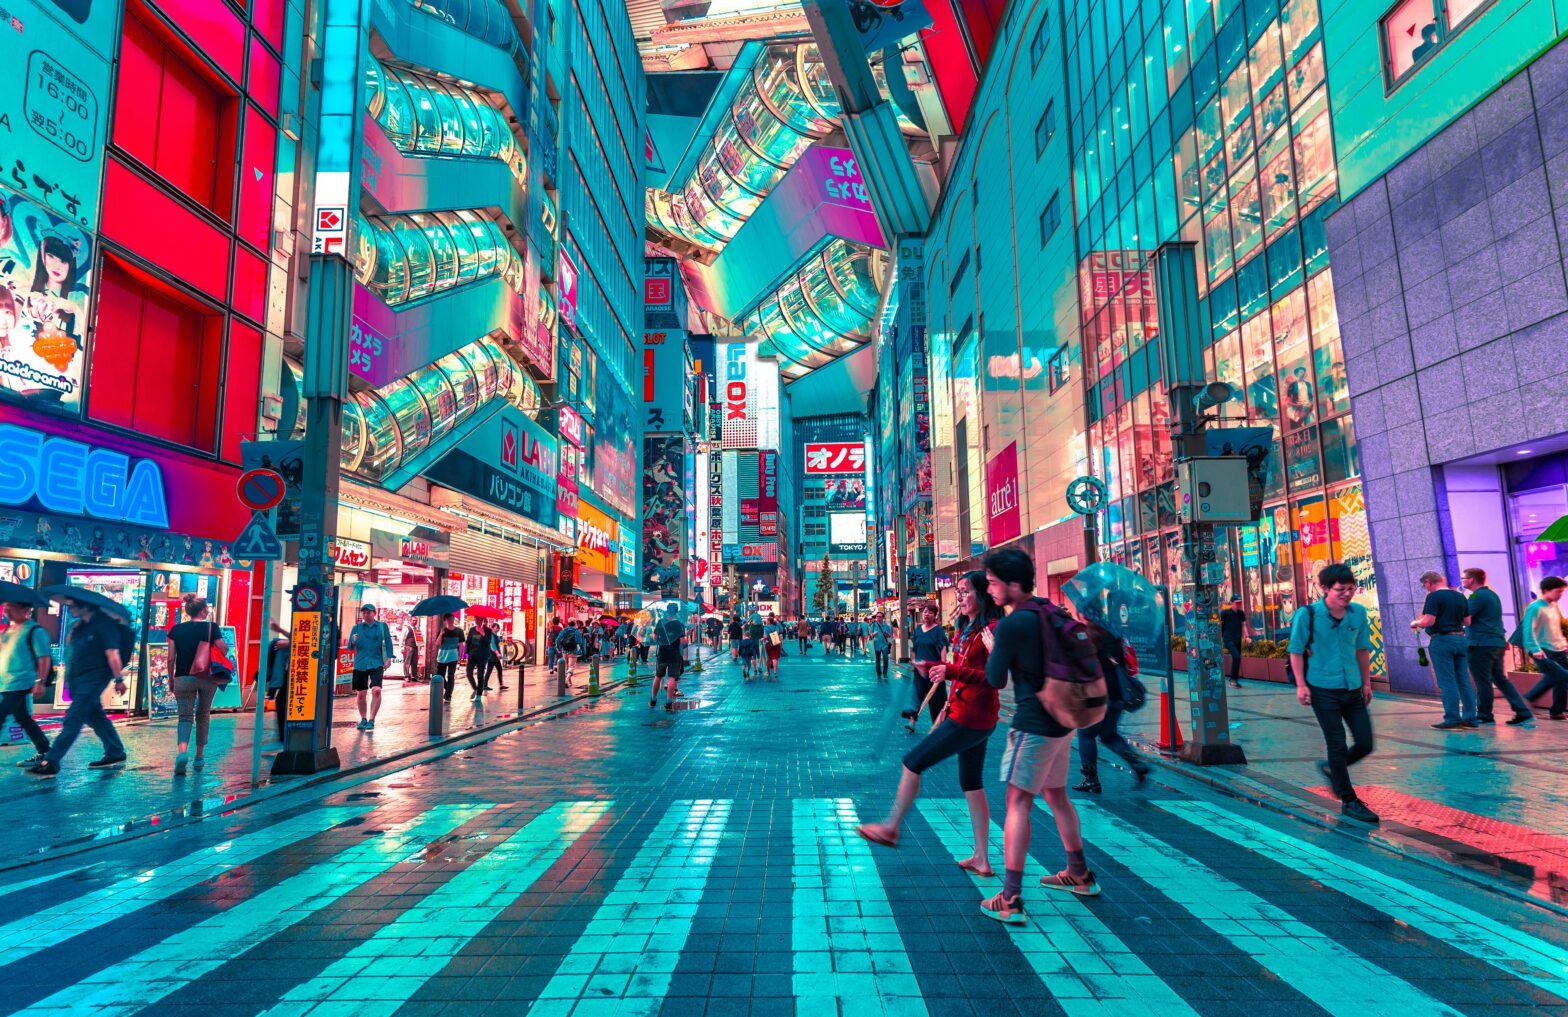 10 Things To Do In Tokyo For $25 Or Less